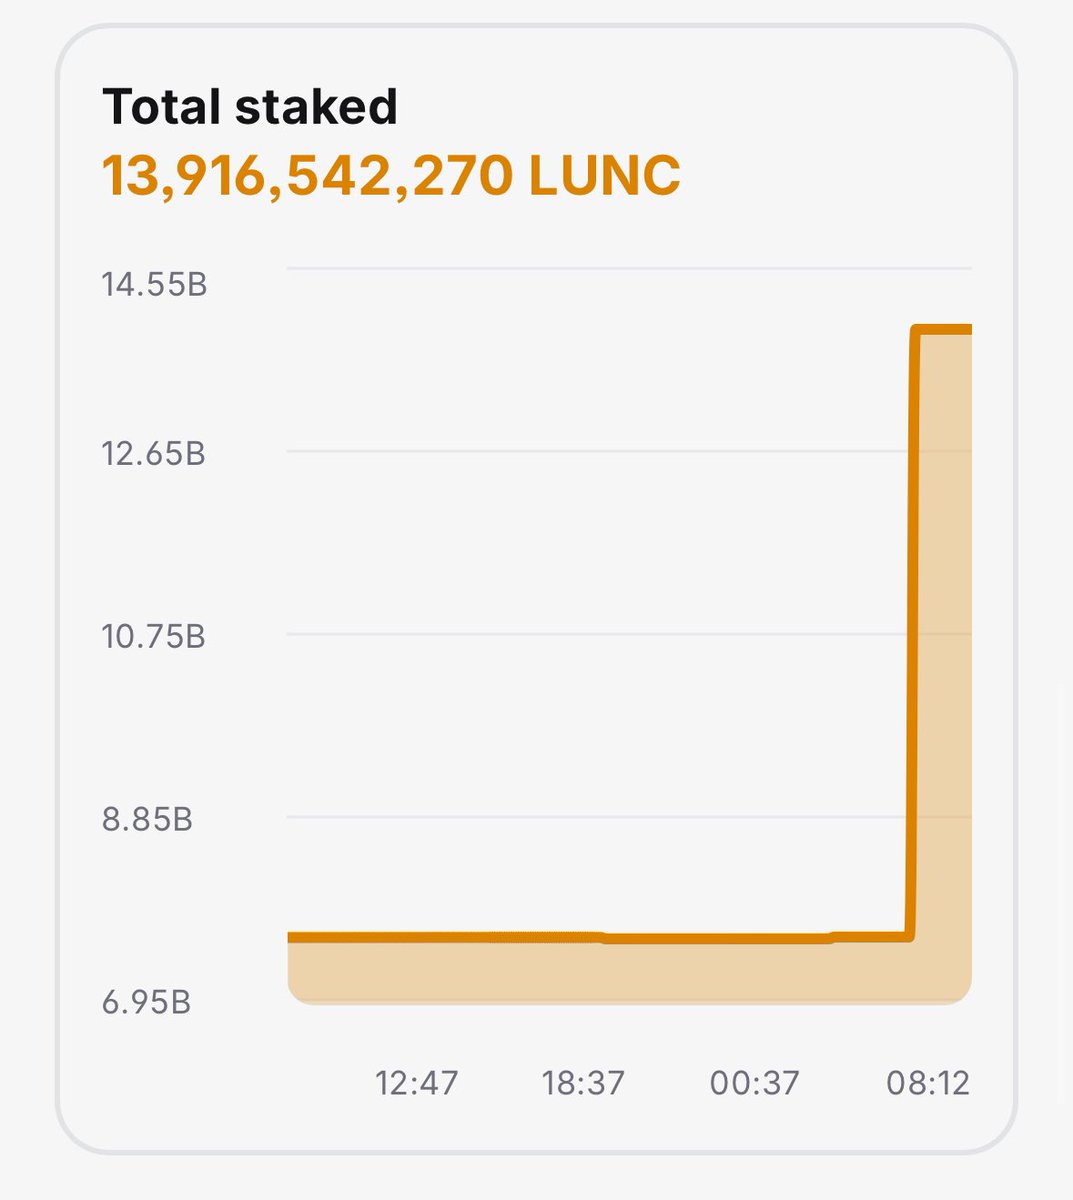 Many thanks to the new #LUNC delegator who doubled the voting power of our #LunaClassic validator. Any profit from the validator will continue to be used only for operating costs, supporting new projects and strengthening our self-stake. The last few days have been very